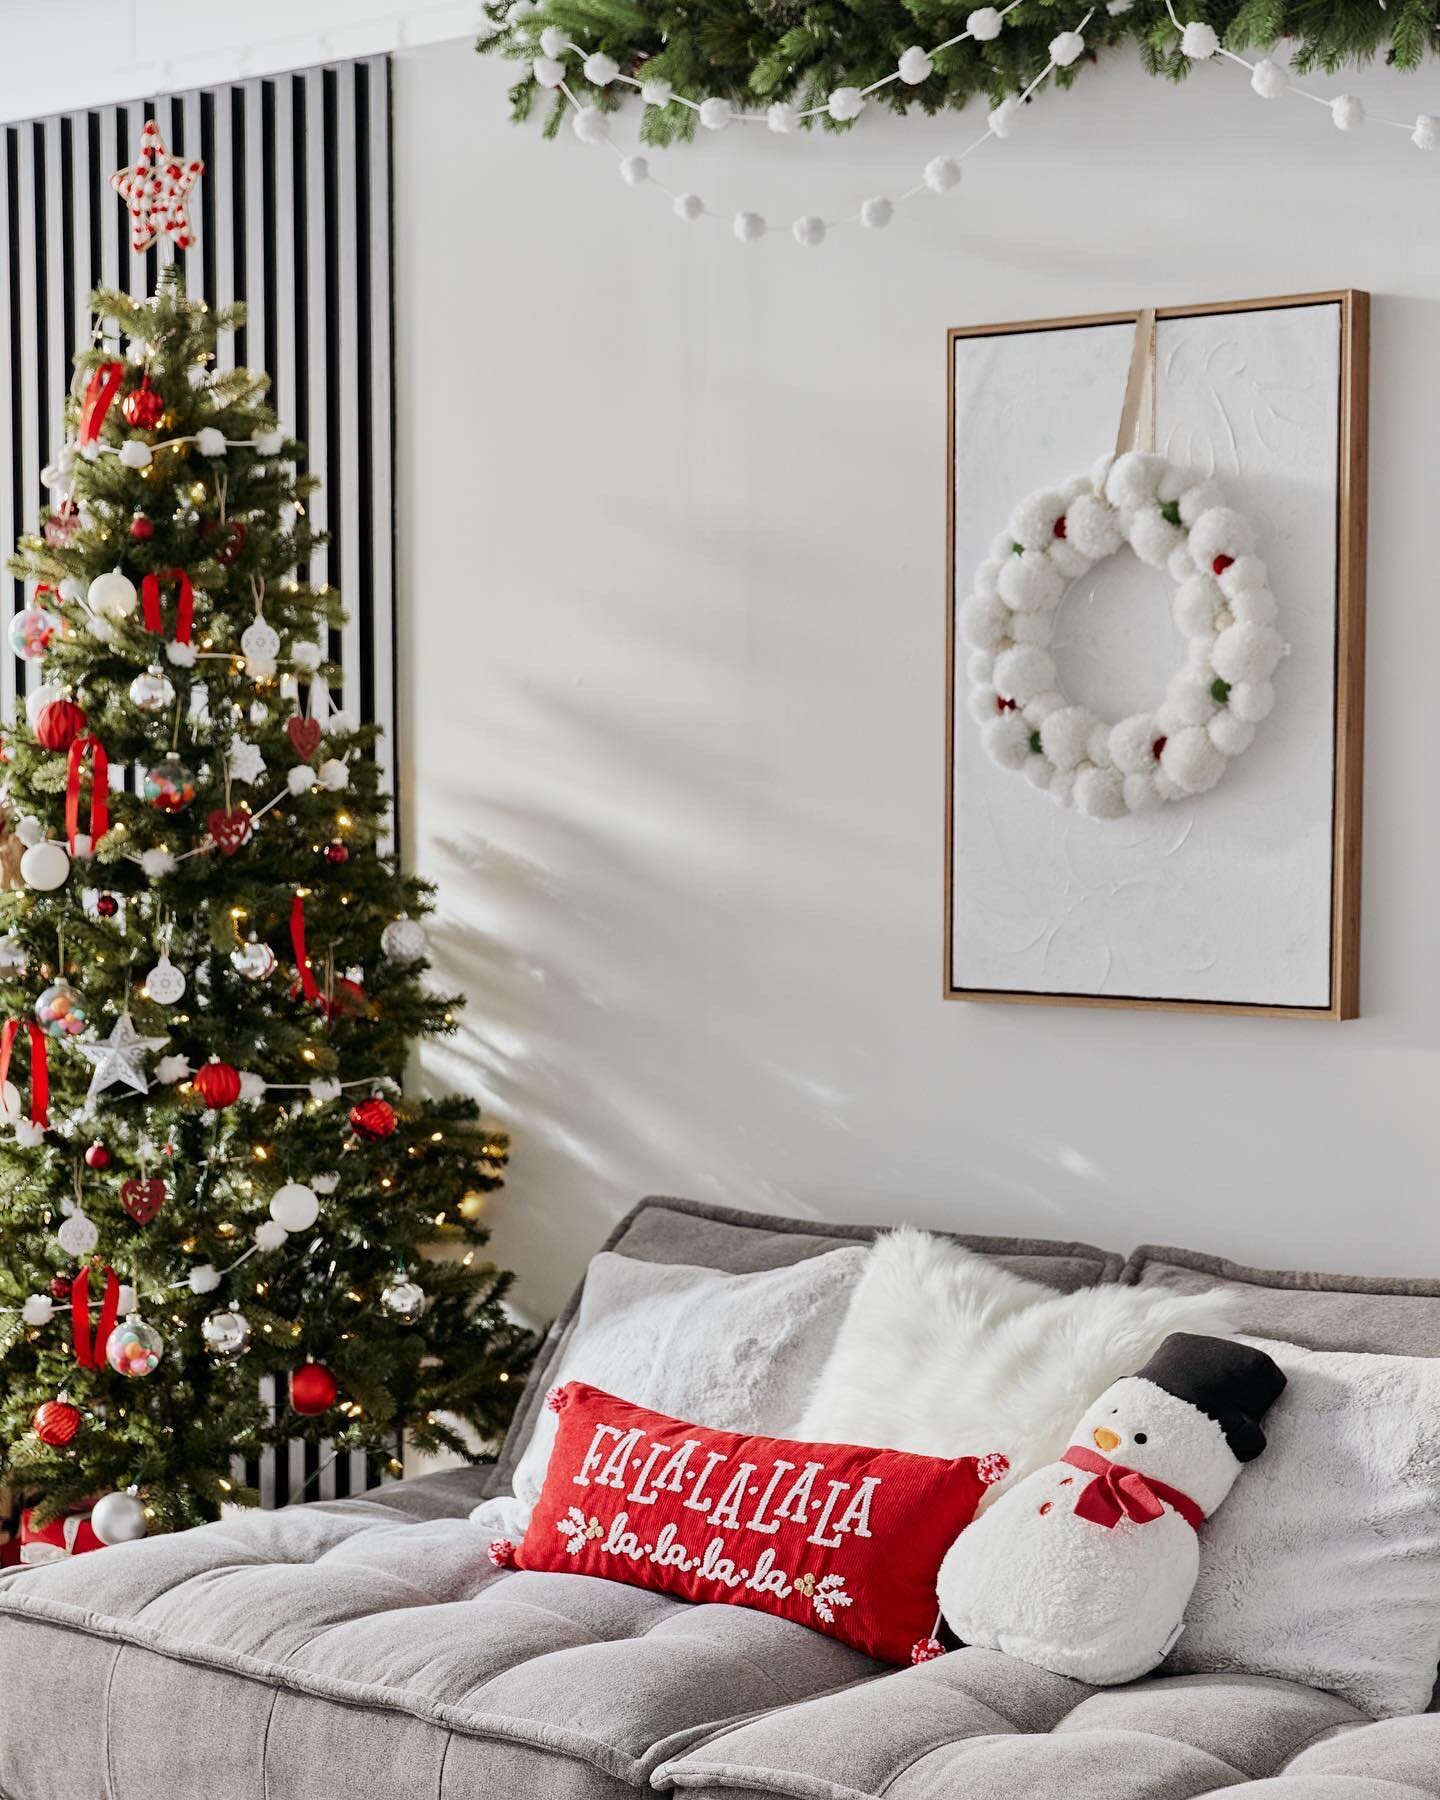 ⛄️Welcome to the cozy nook! We love the combination of red, white and pops of Christmas colours in this space. This extra cozy Christmas nook will sure be the best place to snuggle with your loved ones. 

📍Studio Plus Four 
🗓 Setup dates: Oct 21 - 